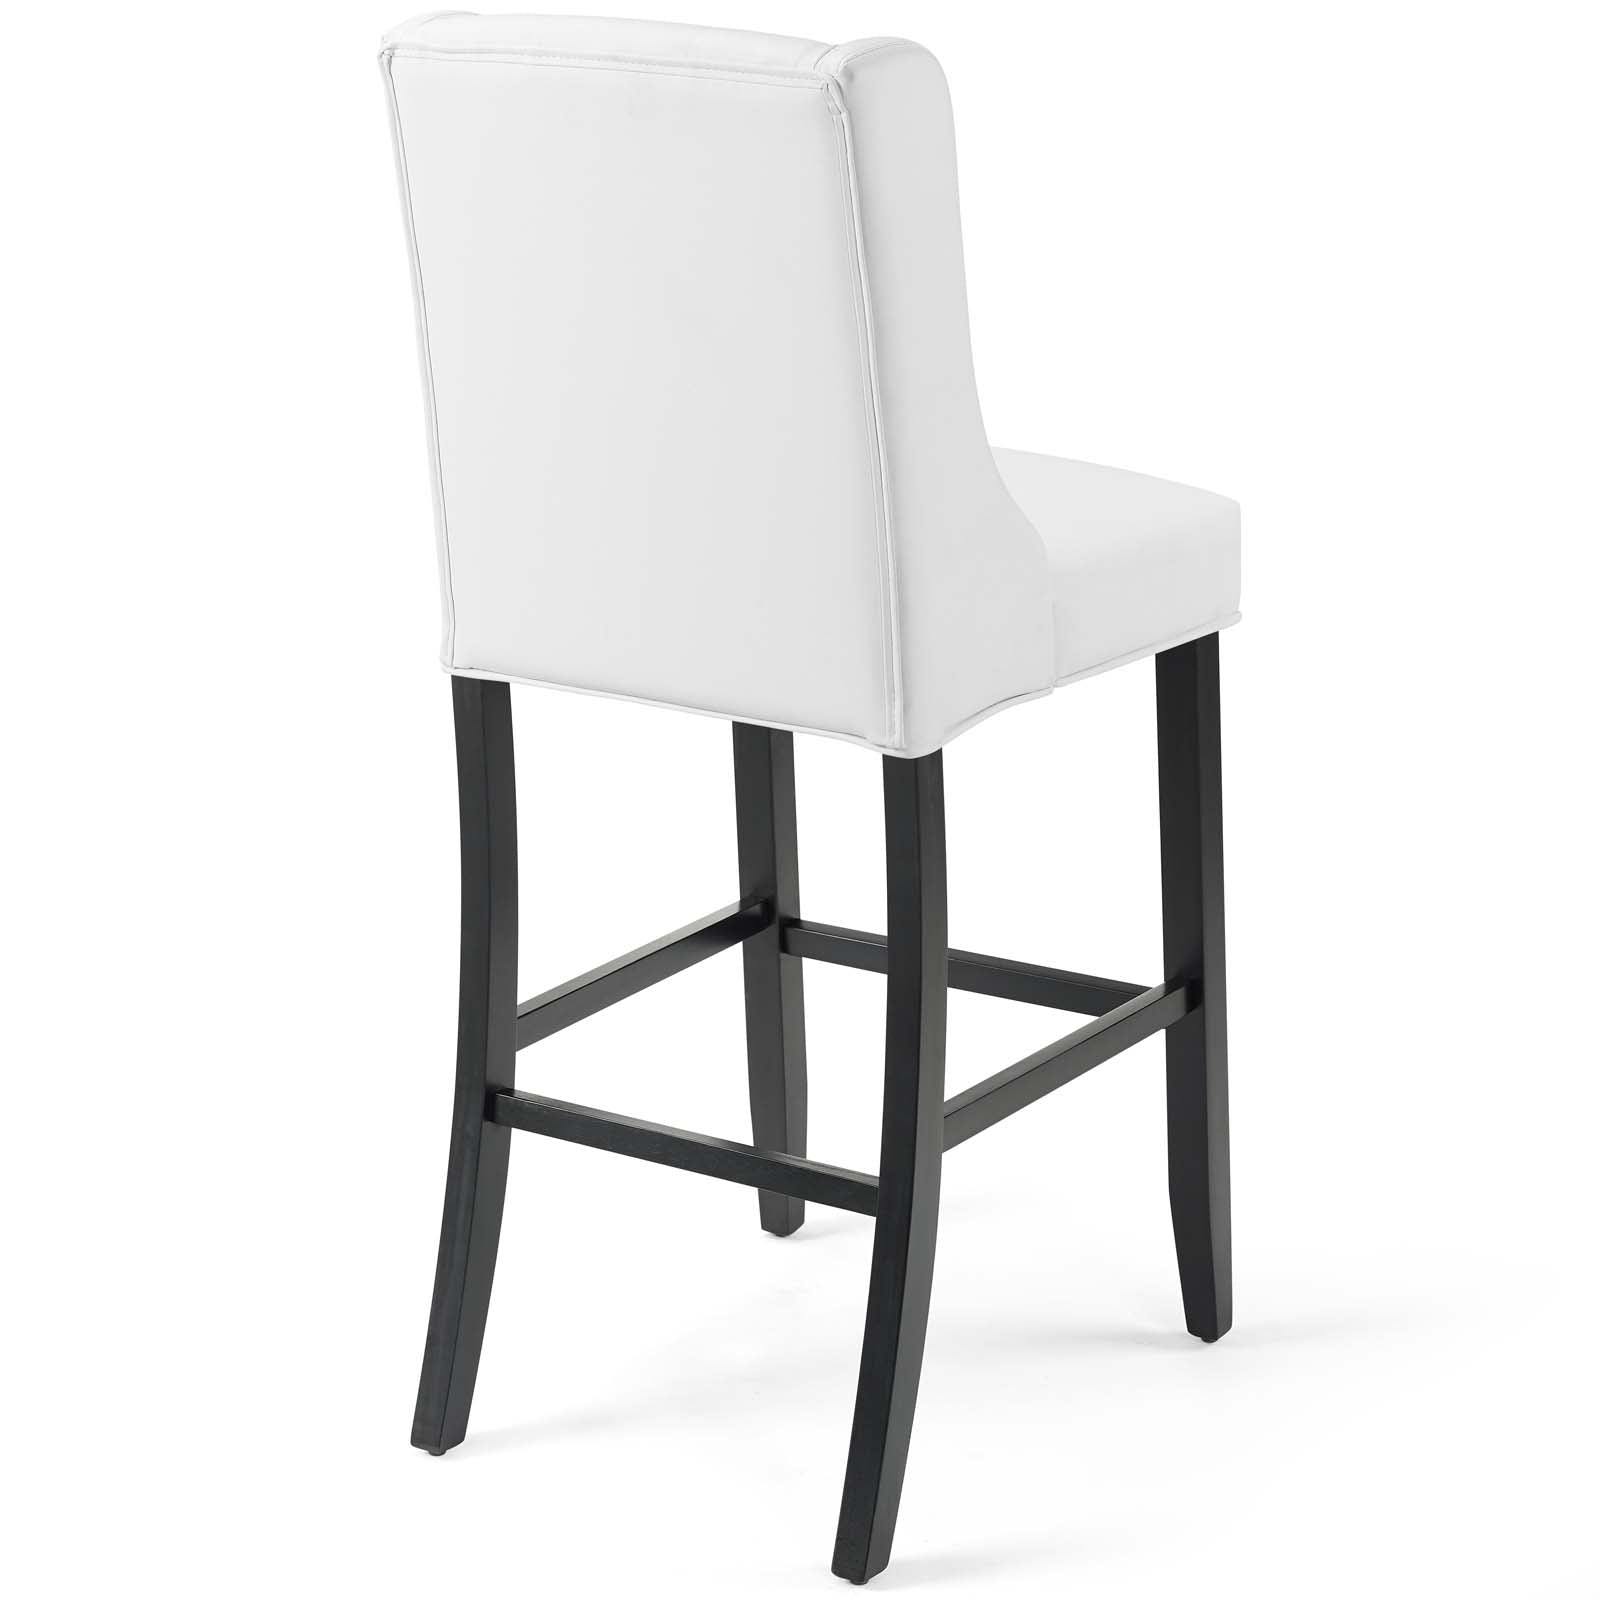 Baronet Tufted Button Faux Leather Bar Stool - East Shore Modern Home Furnishings